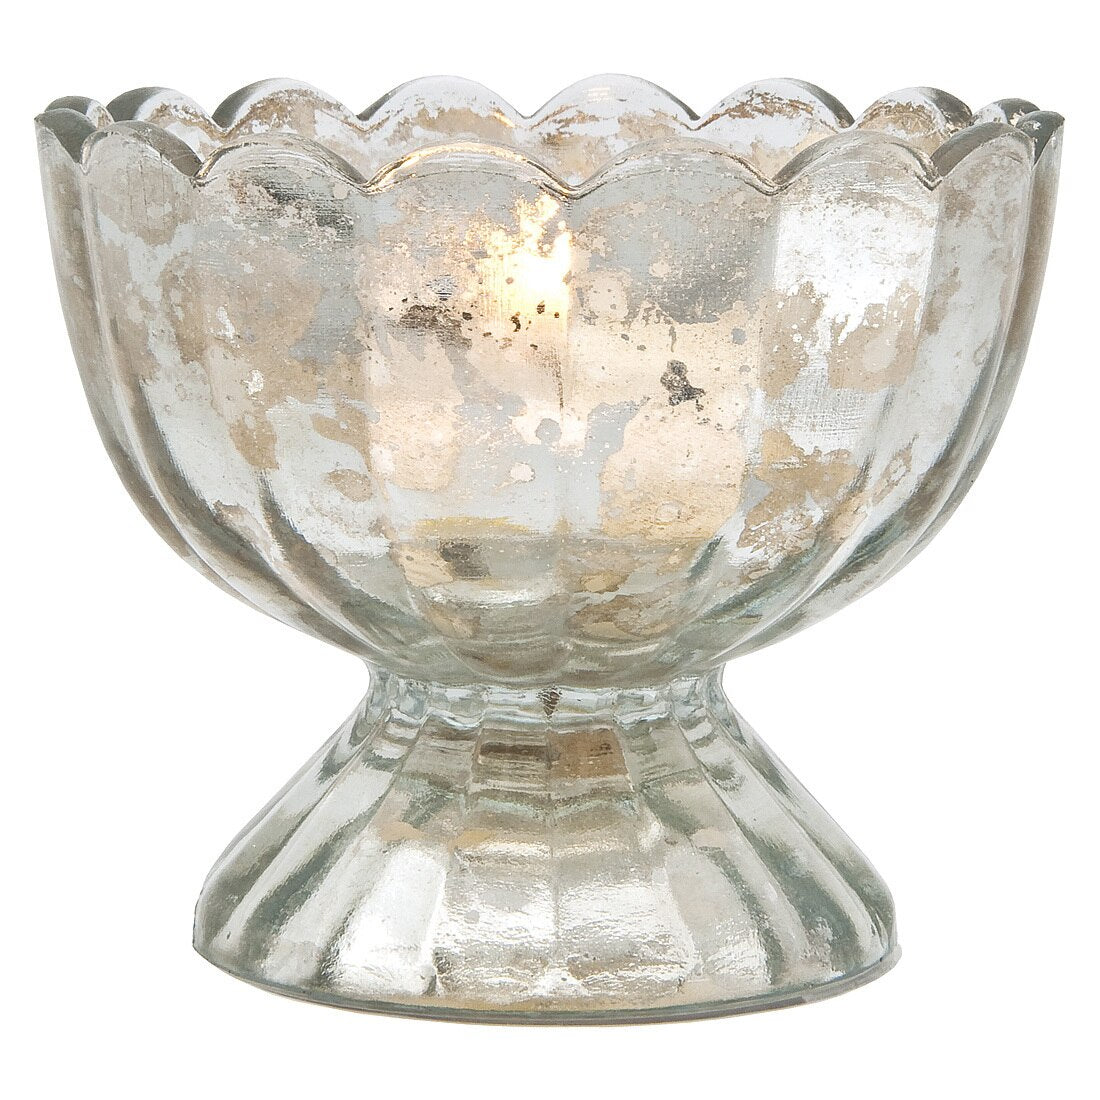 BLOWOUT (20 PACK) Vintage Mercury Glass Candle Holder (3-Inch, Suzanne Design, Sundae Cup Motif, Silver) - For Use with Tea Lights - Home Decor and Wedding Decorations